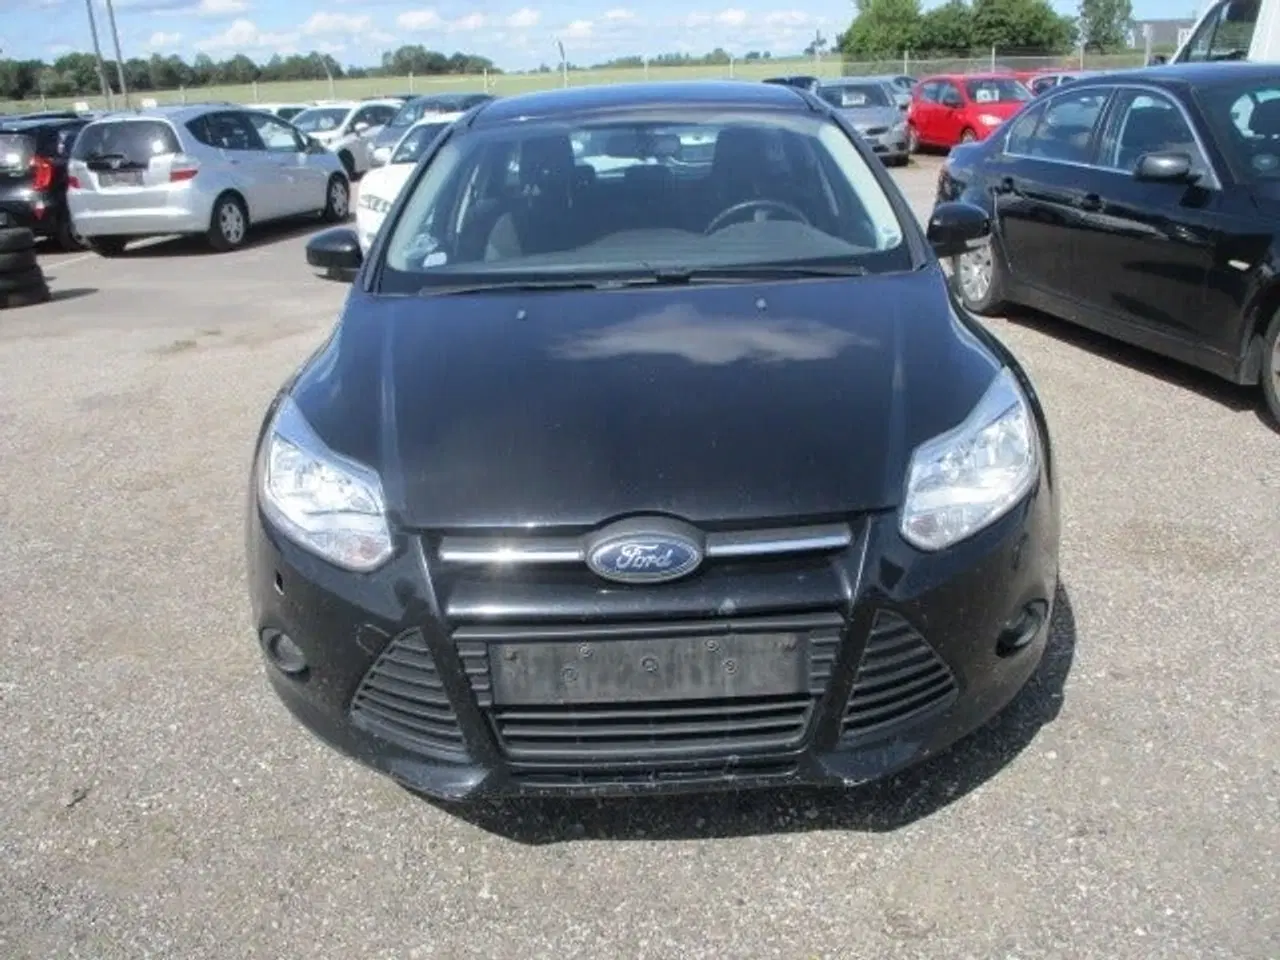 Billede 2 - Ford Focus 1,6 Ti-VCT 105 Trend stc.